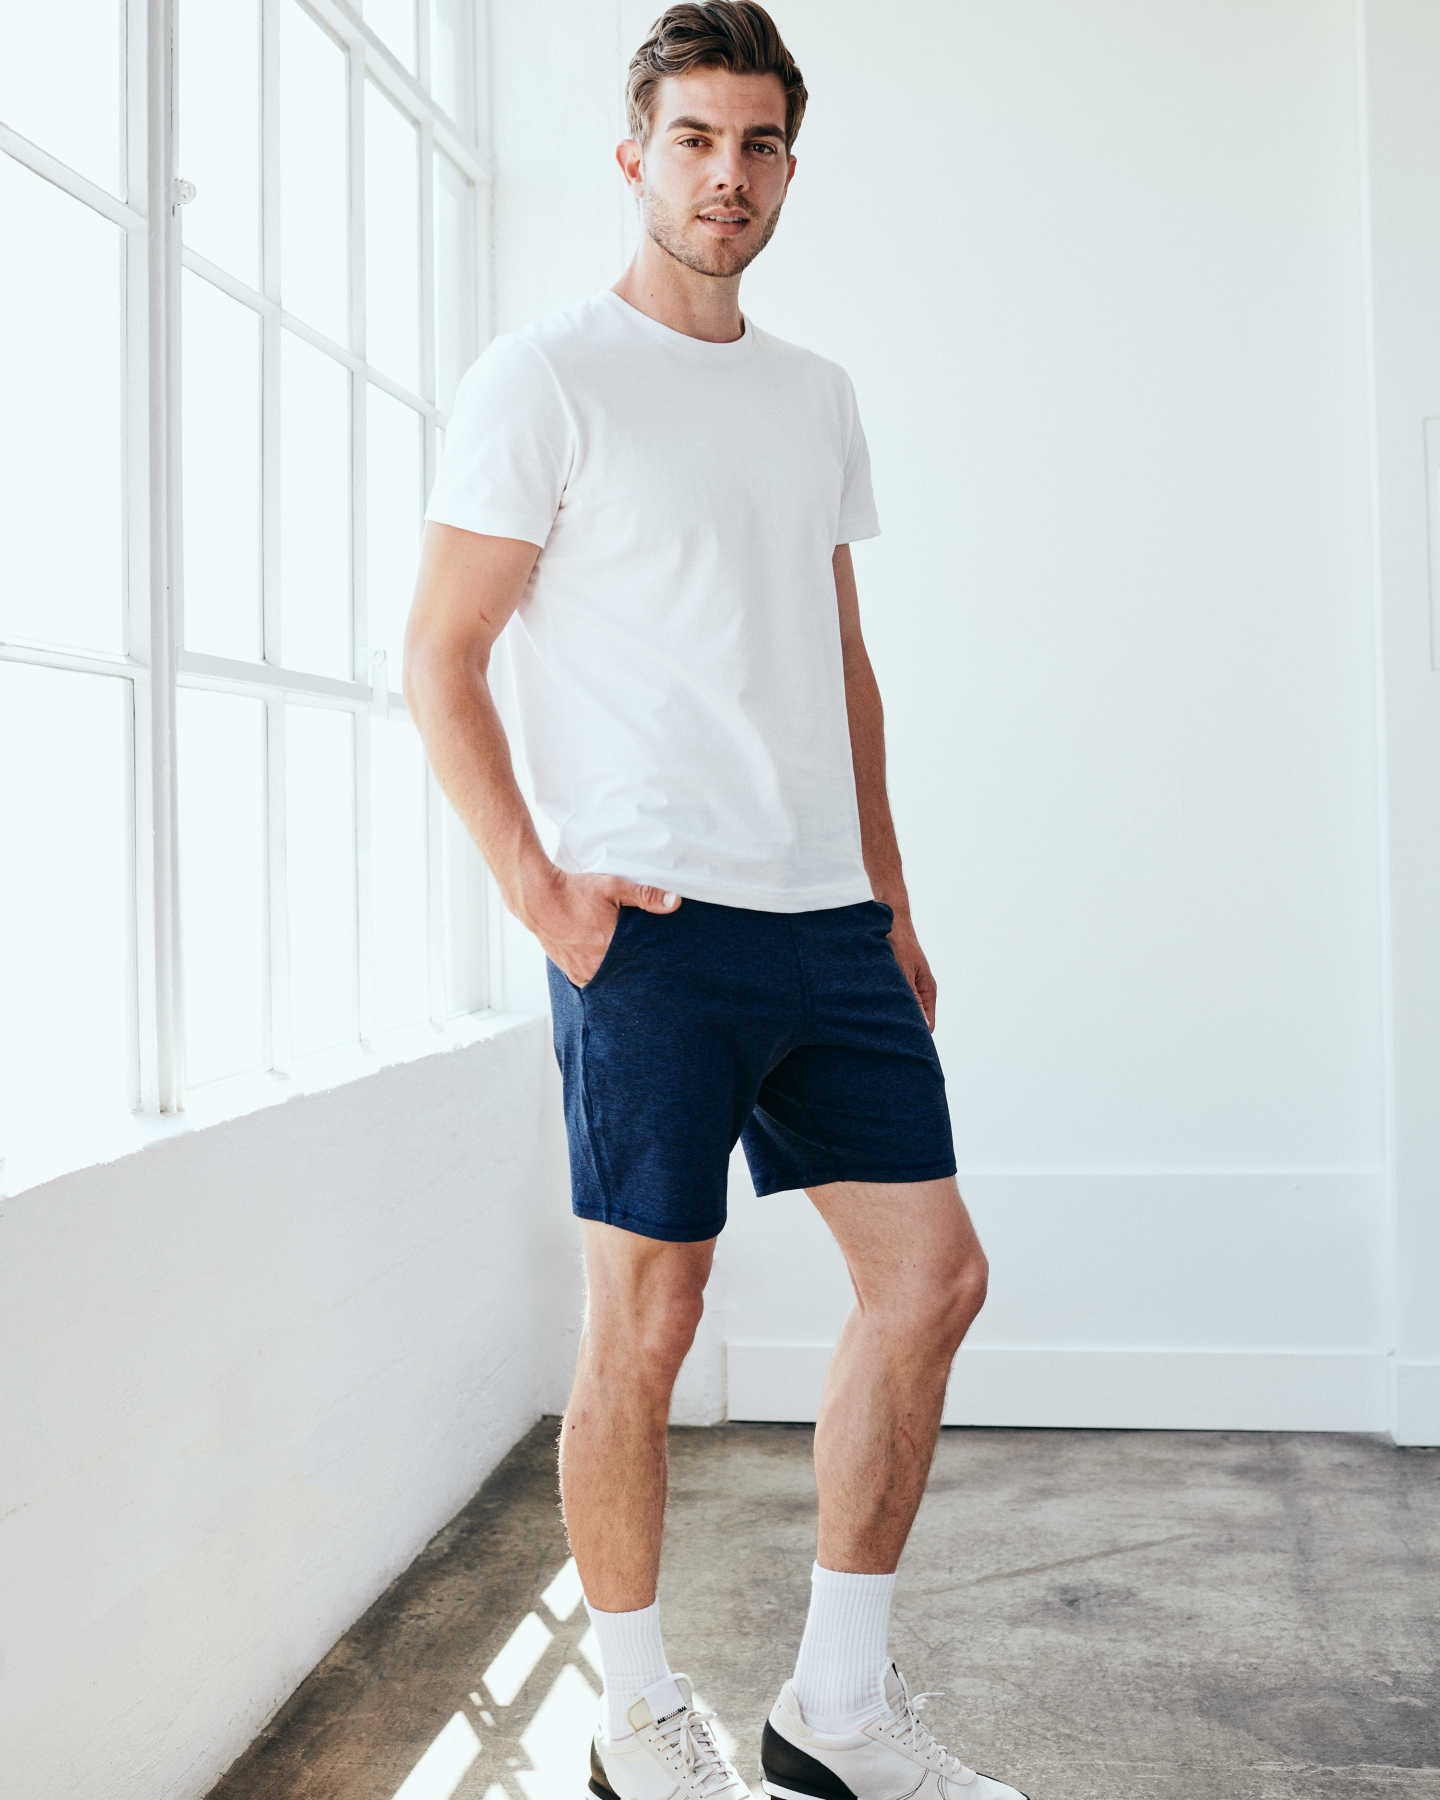 You May Also Like - Flowknit Ultra-Soft Performance Short - Heather Navy